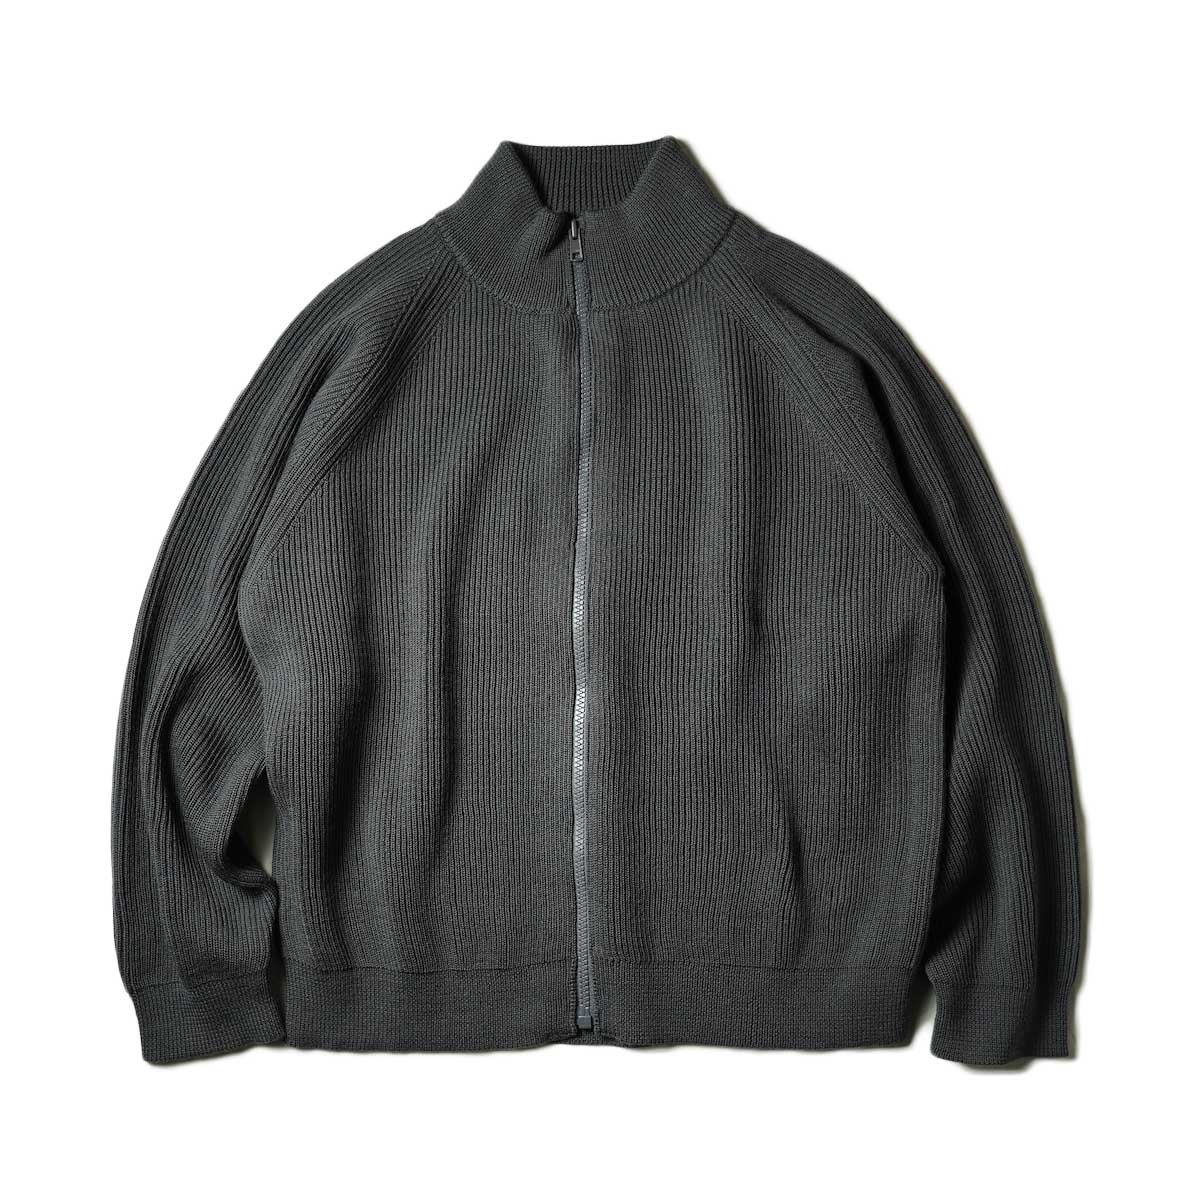 EVCON / DRIVERS SWEATER (Charcoal)